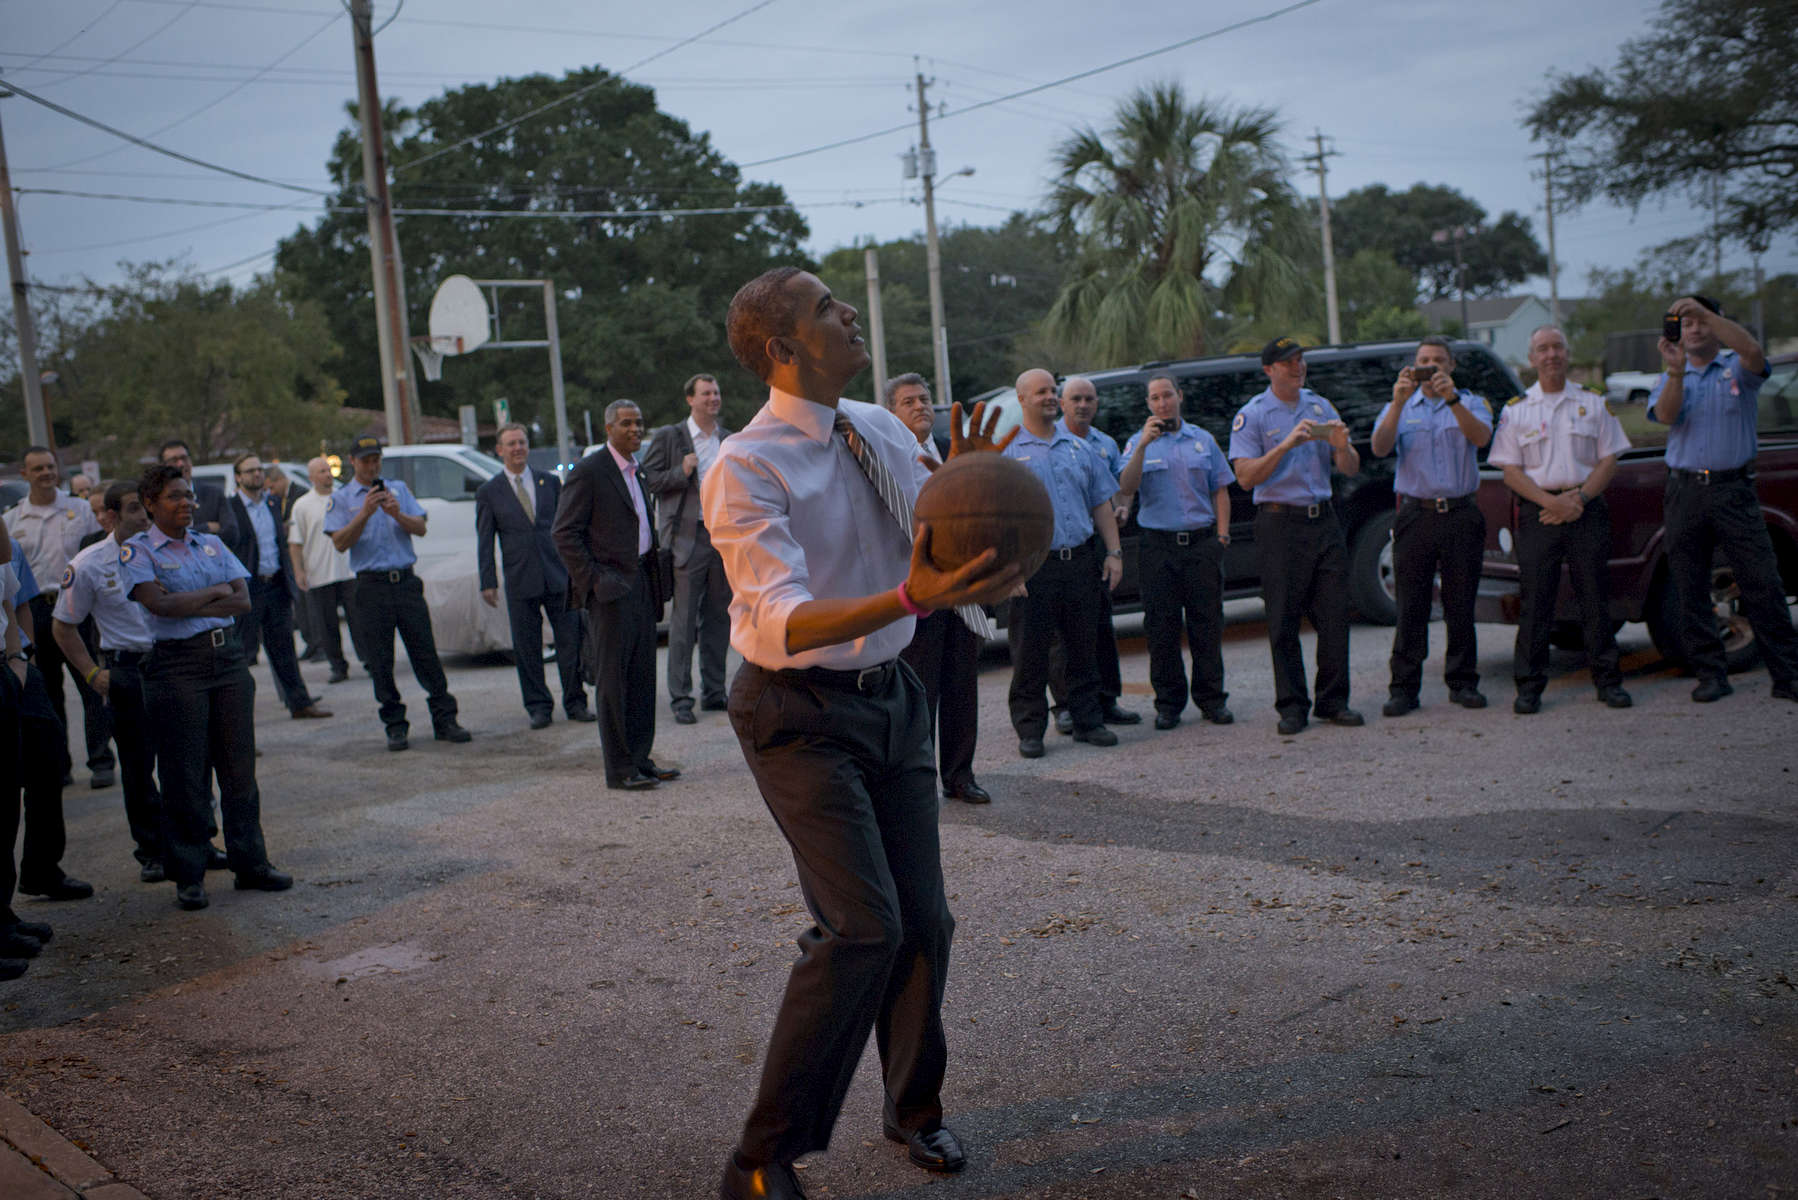 October 25, 2012 - Tampa, FL:  President Barack Obama shoots a basketball during a visit at a Tampa firehouse during a 48 hour straight swing of campaign events. (Scout Tufankjian for Obama for America/Polaris)